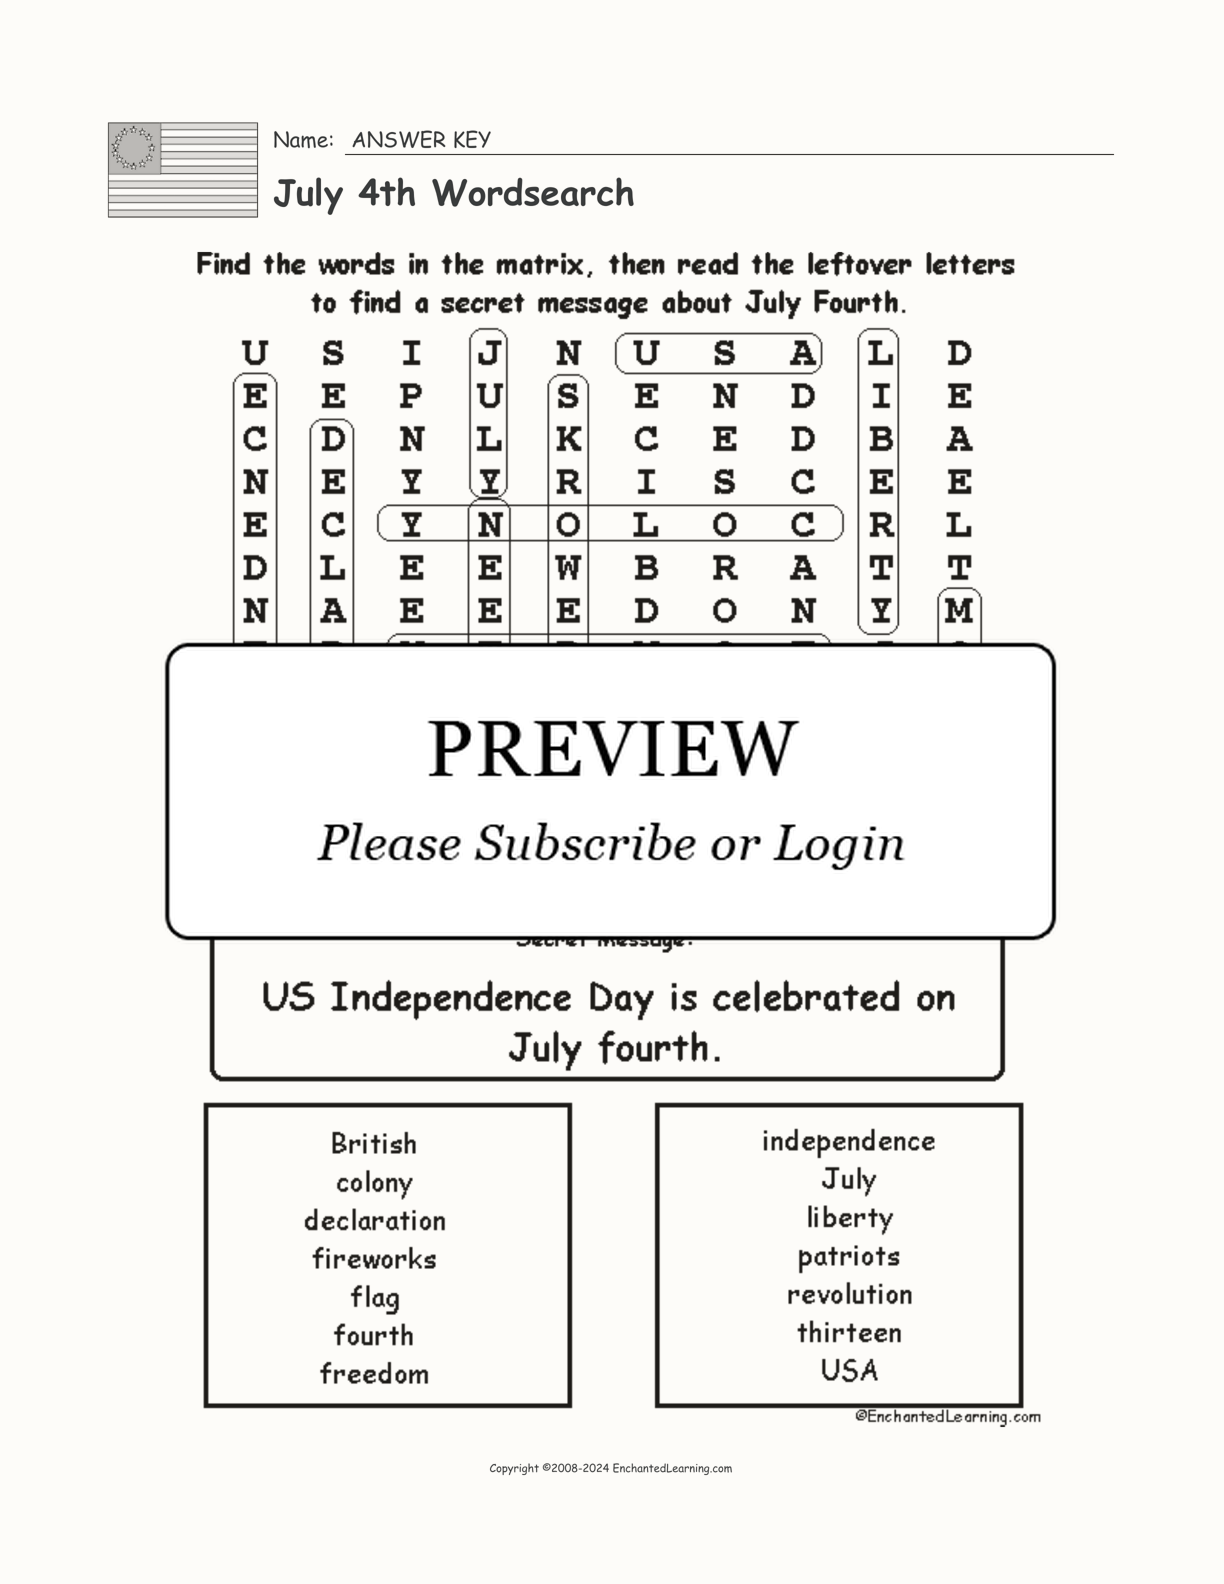 July 4th Wordsearch interactive worksheet page 2